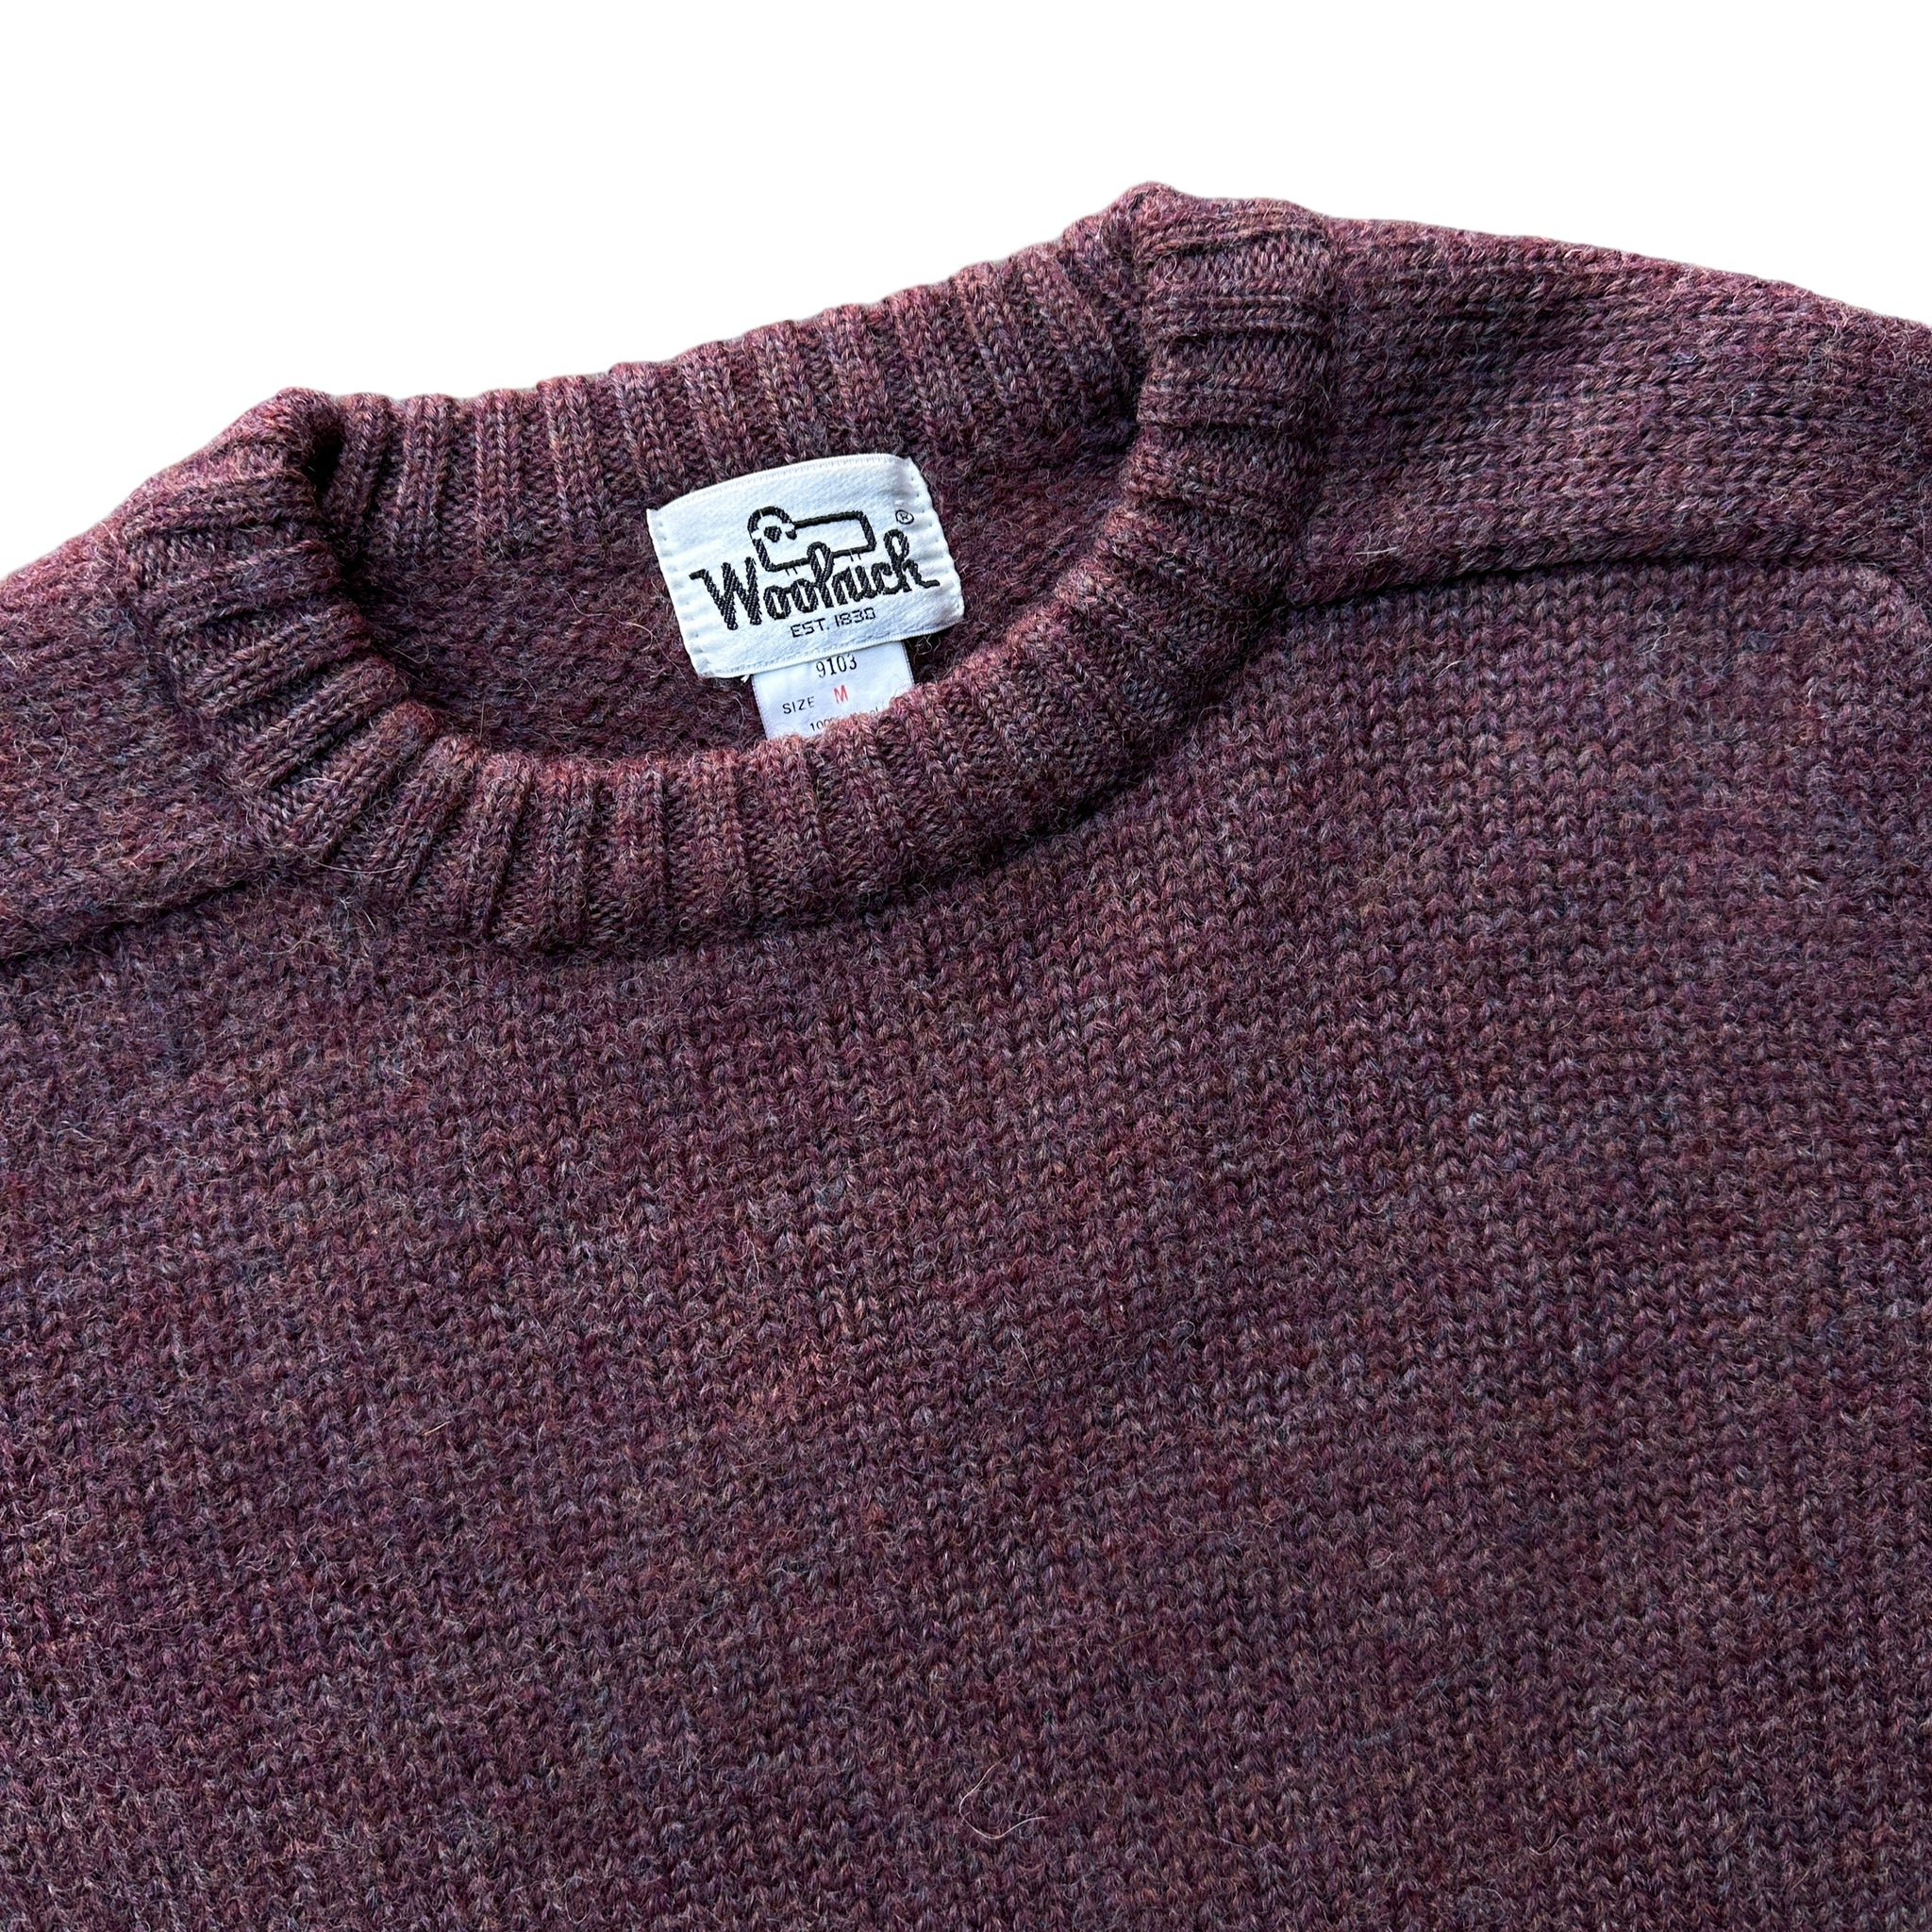 80s Woolrich sweater Small